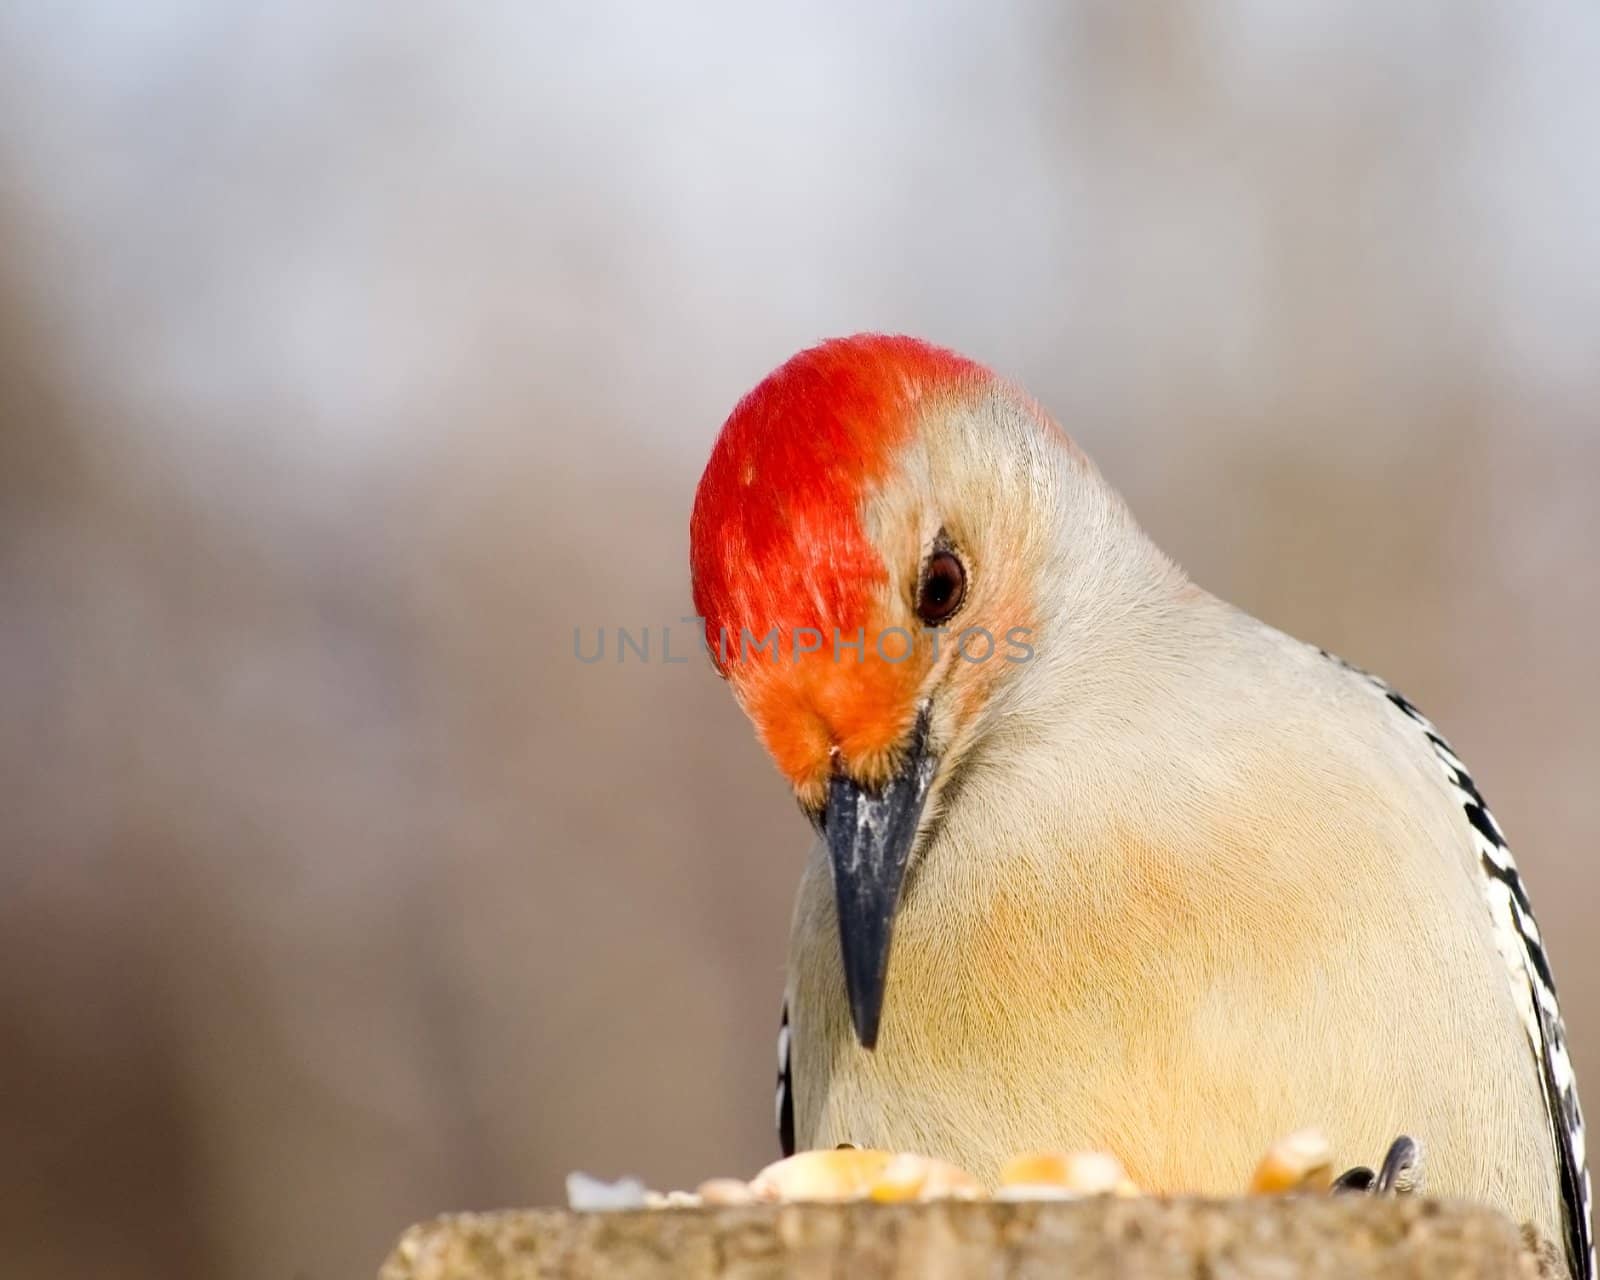 A closeup of a red-bellied woodpecker looking at bird food.